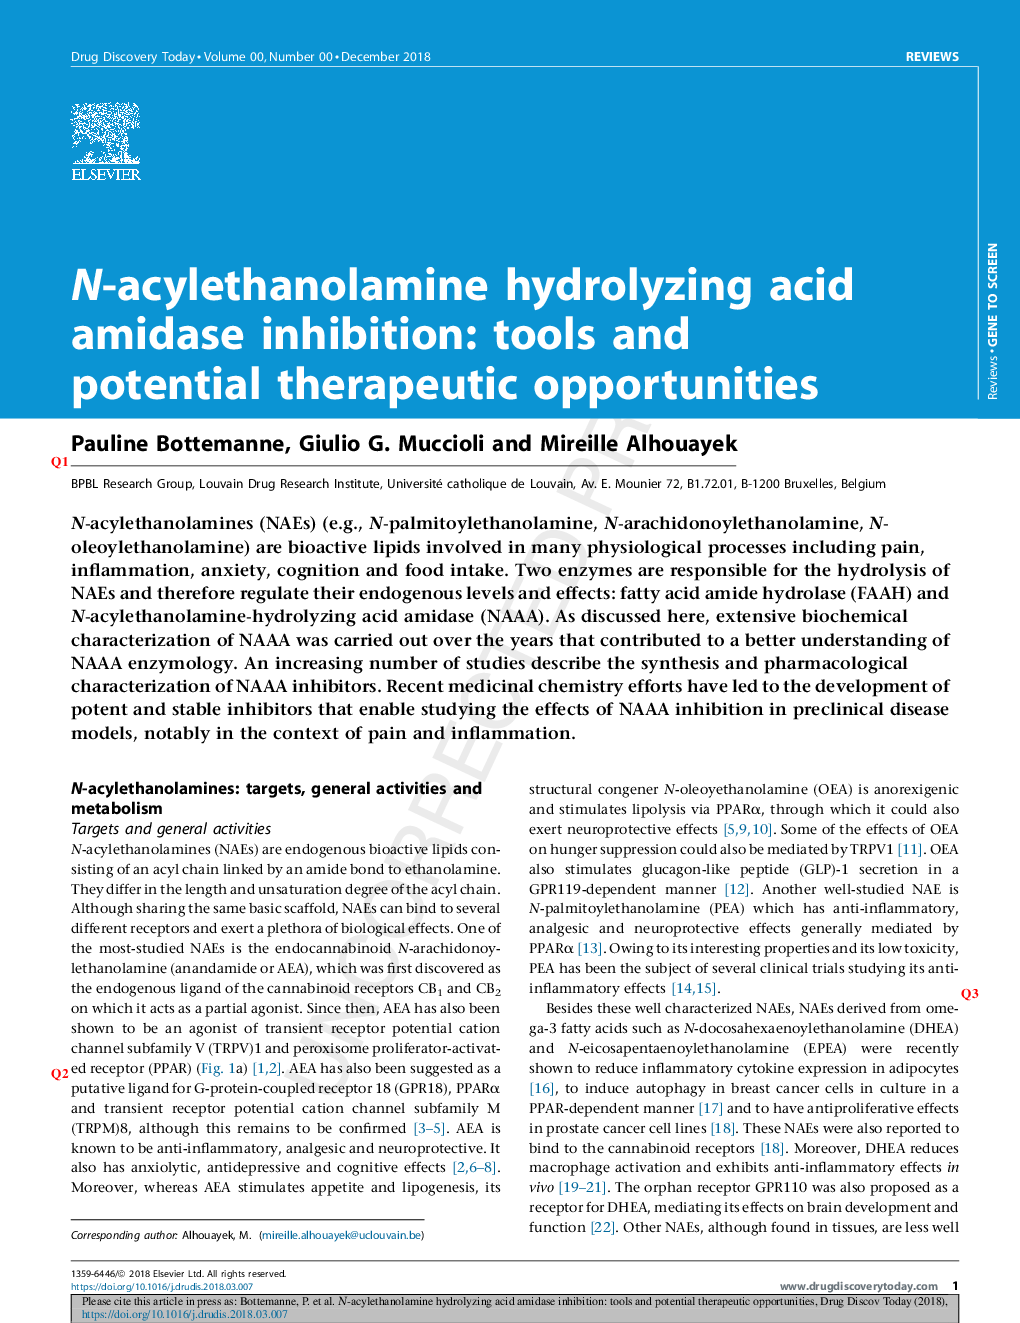 N-acylethanolamine hydrolyzing acid amidase inhibition: tools and potential therapeutic opportunities